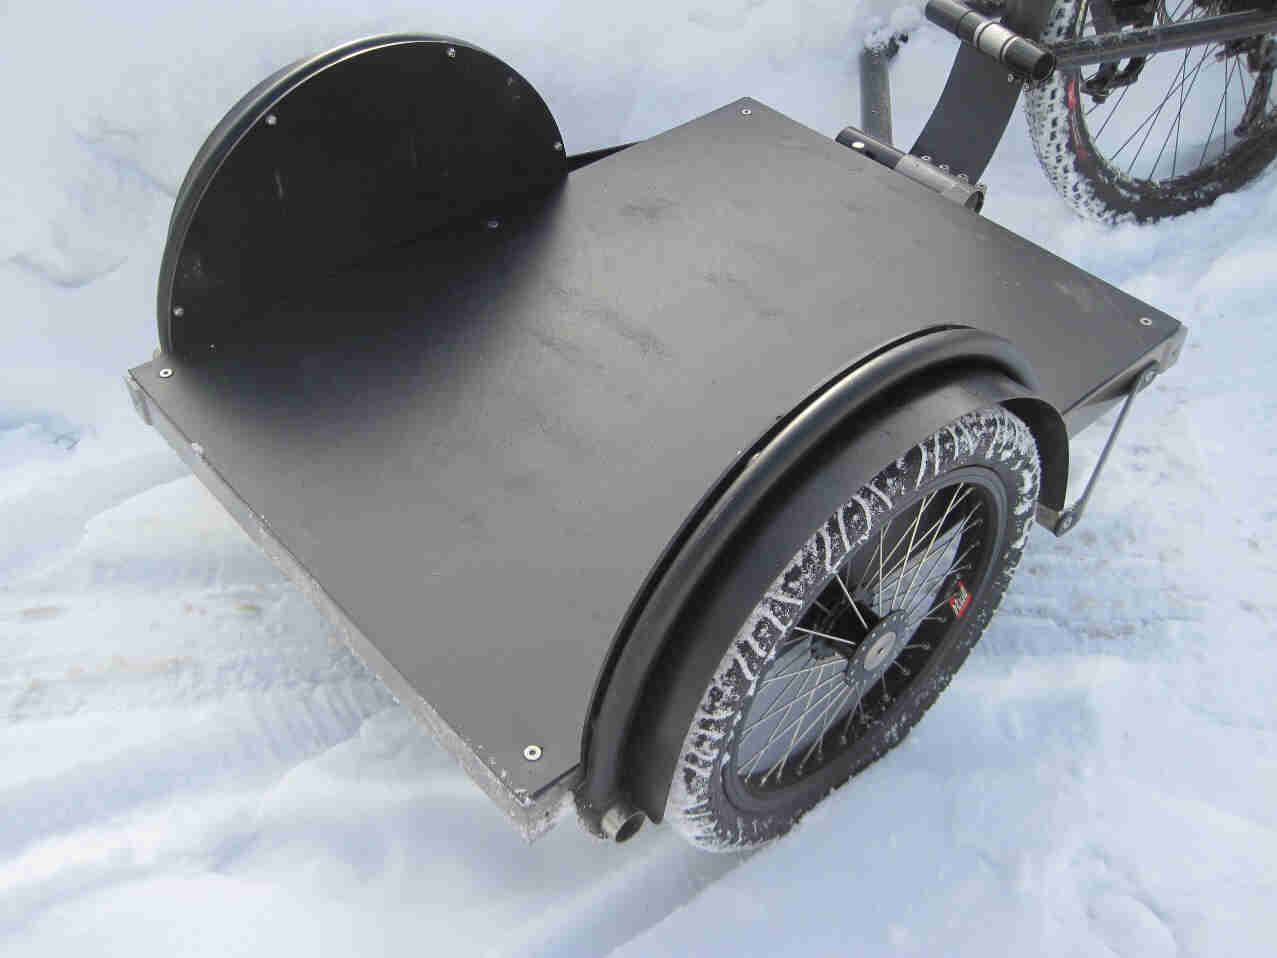 Downward, rear, right side view of a Surly Ted bike trailer with a flat top, parked on snow covered ground